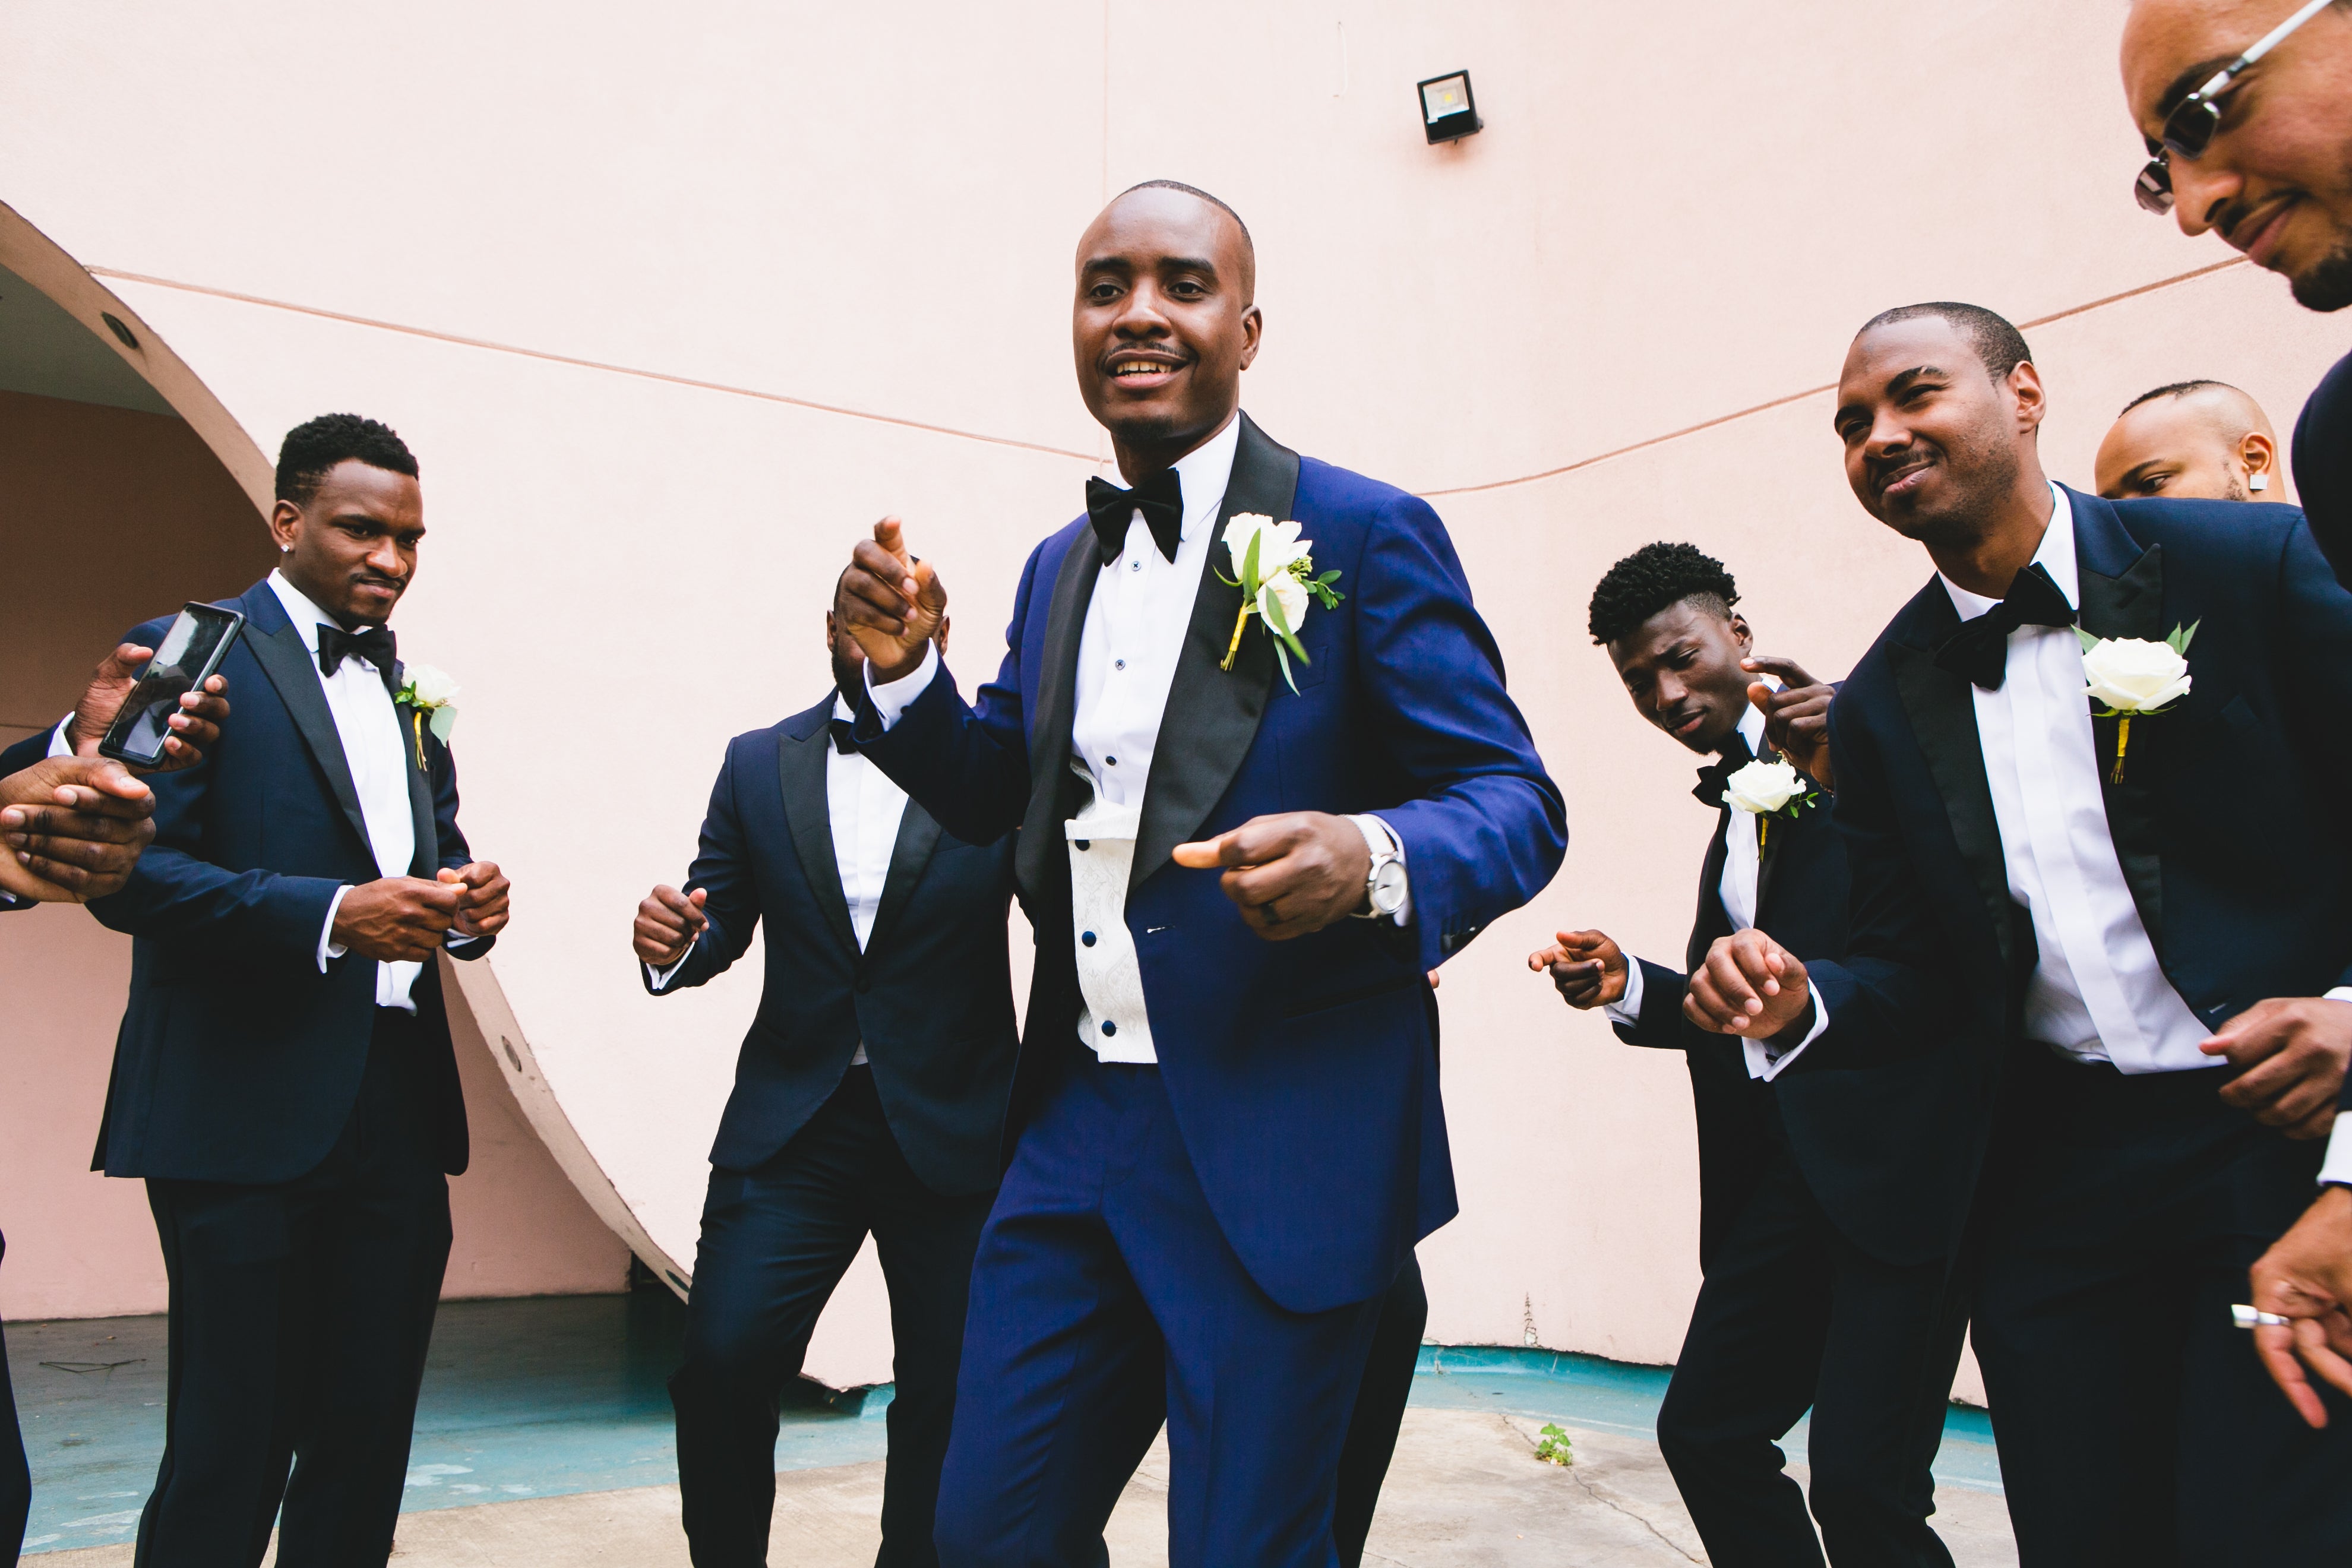 Bridal Bliss: Jessica and Henri Brought Culture And Pride To Their New York Wedding